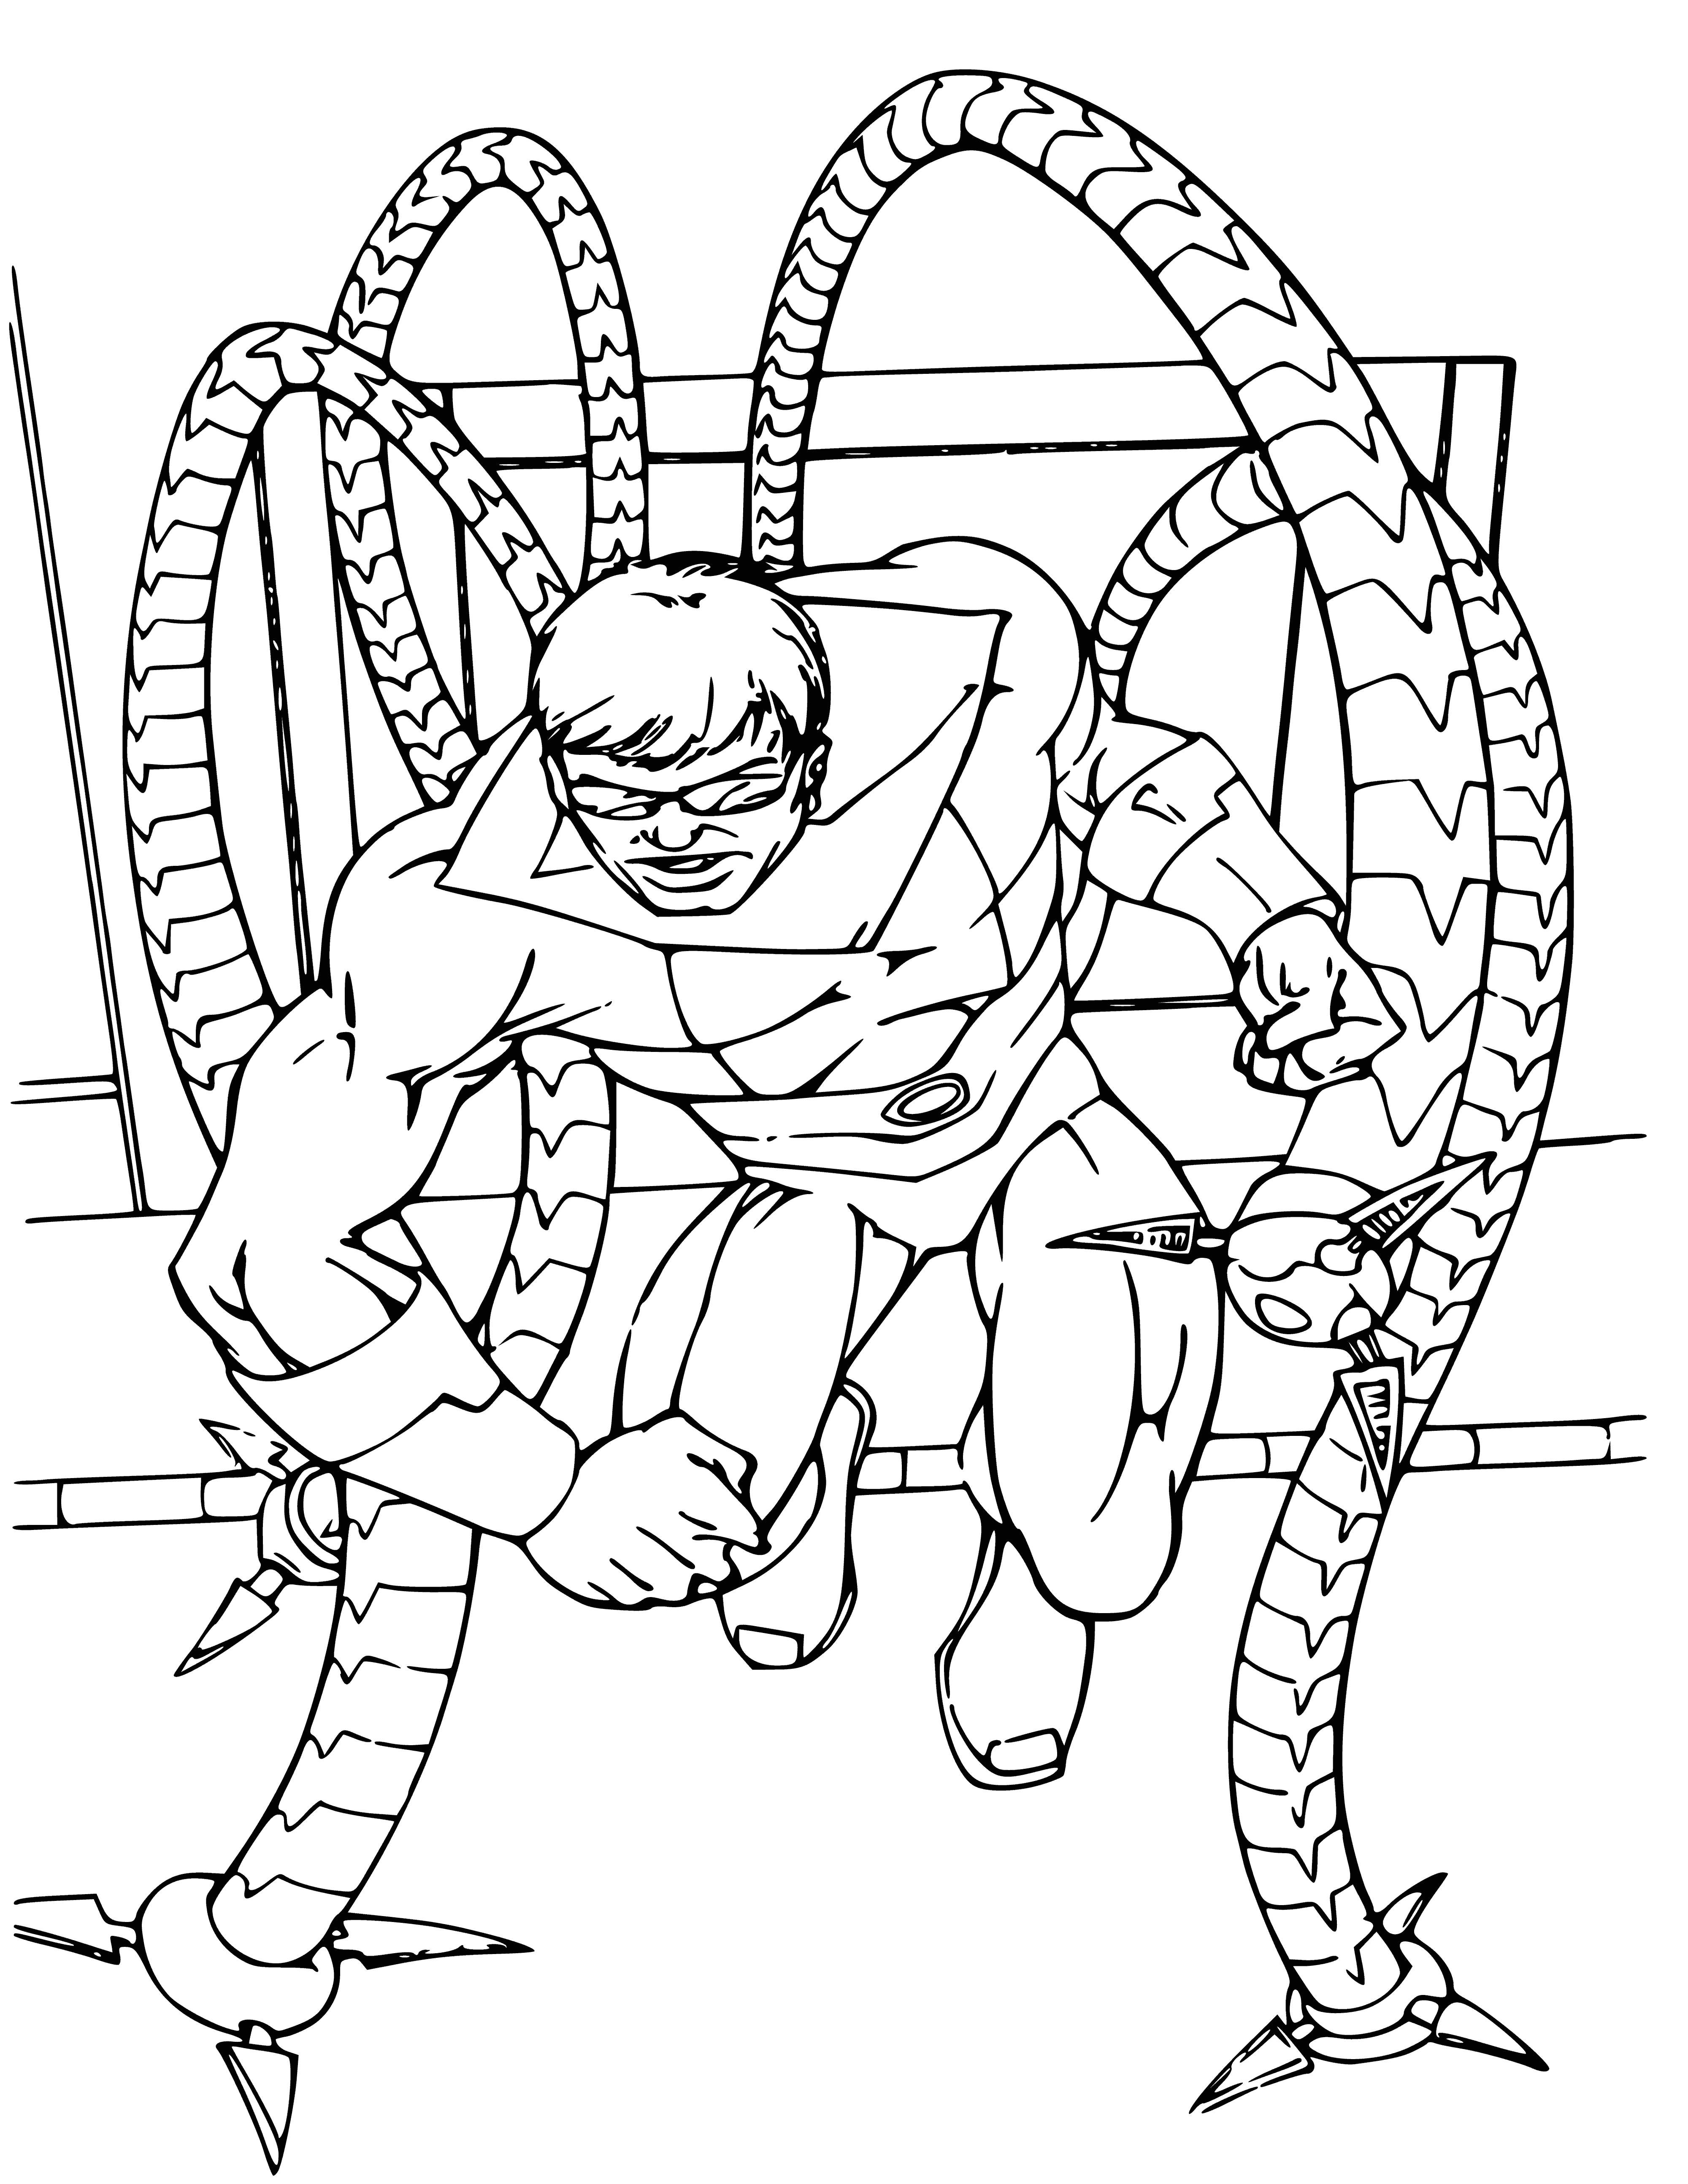 coloring page: Spider-Man dodges tentacles & shoots webbing at Dr. Octopus in fight.